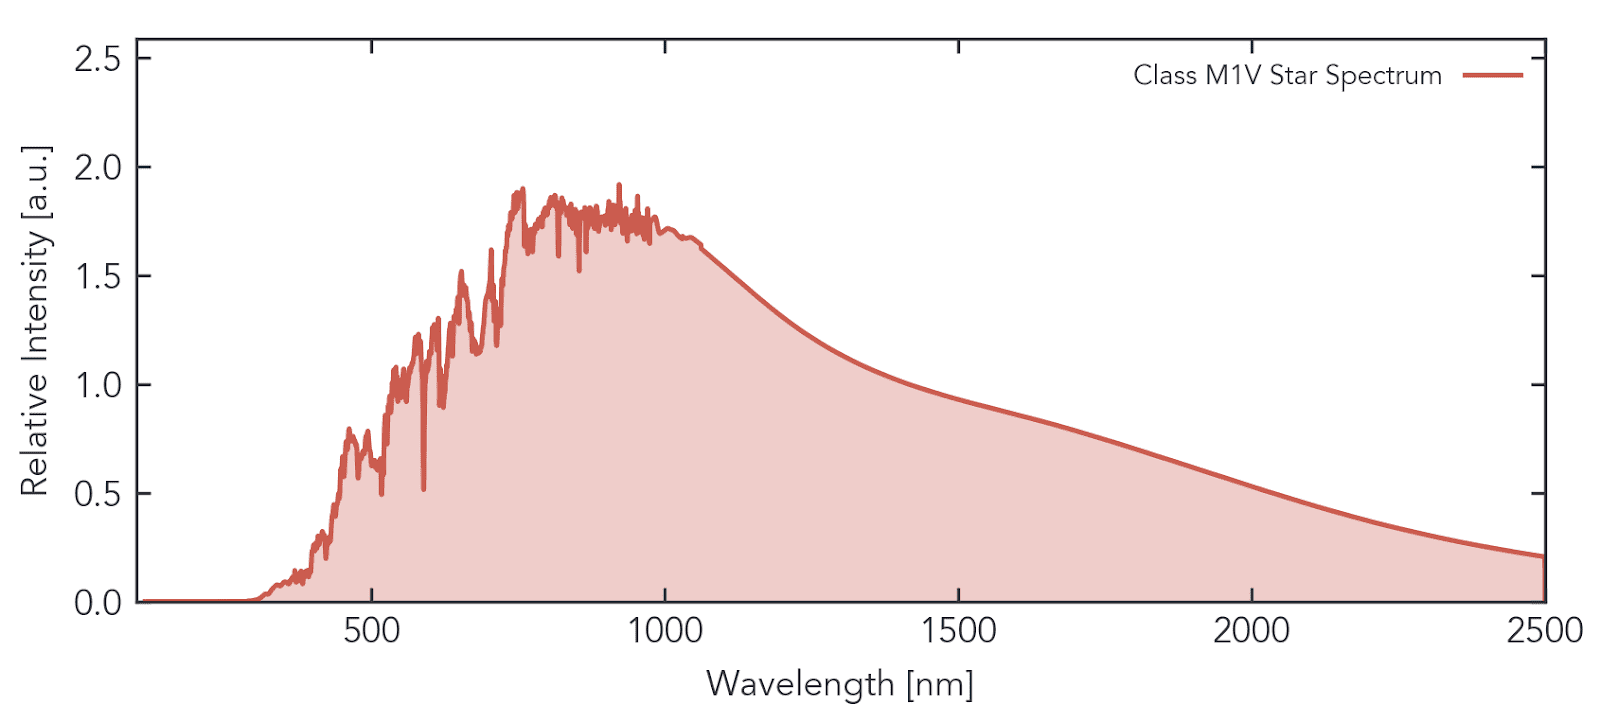 A sample M1V-class star spectrum from ESO data